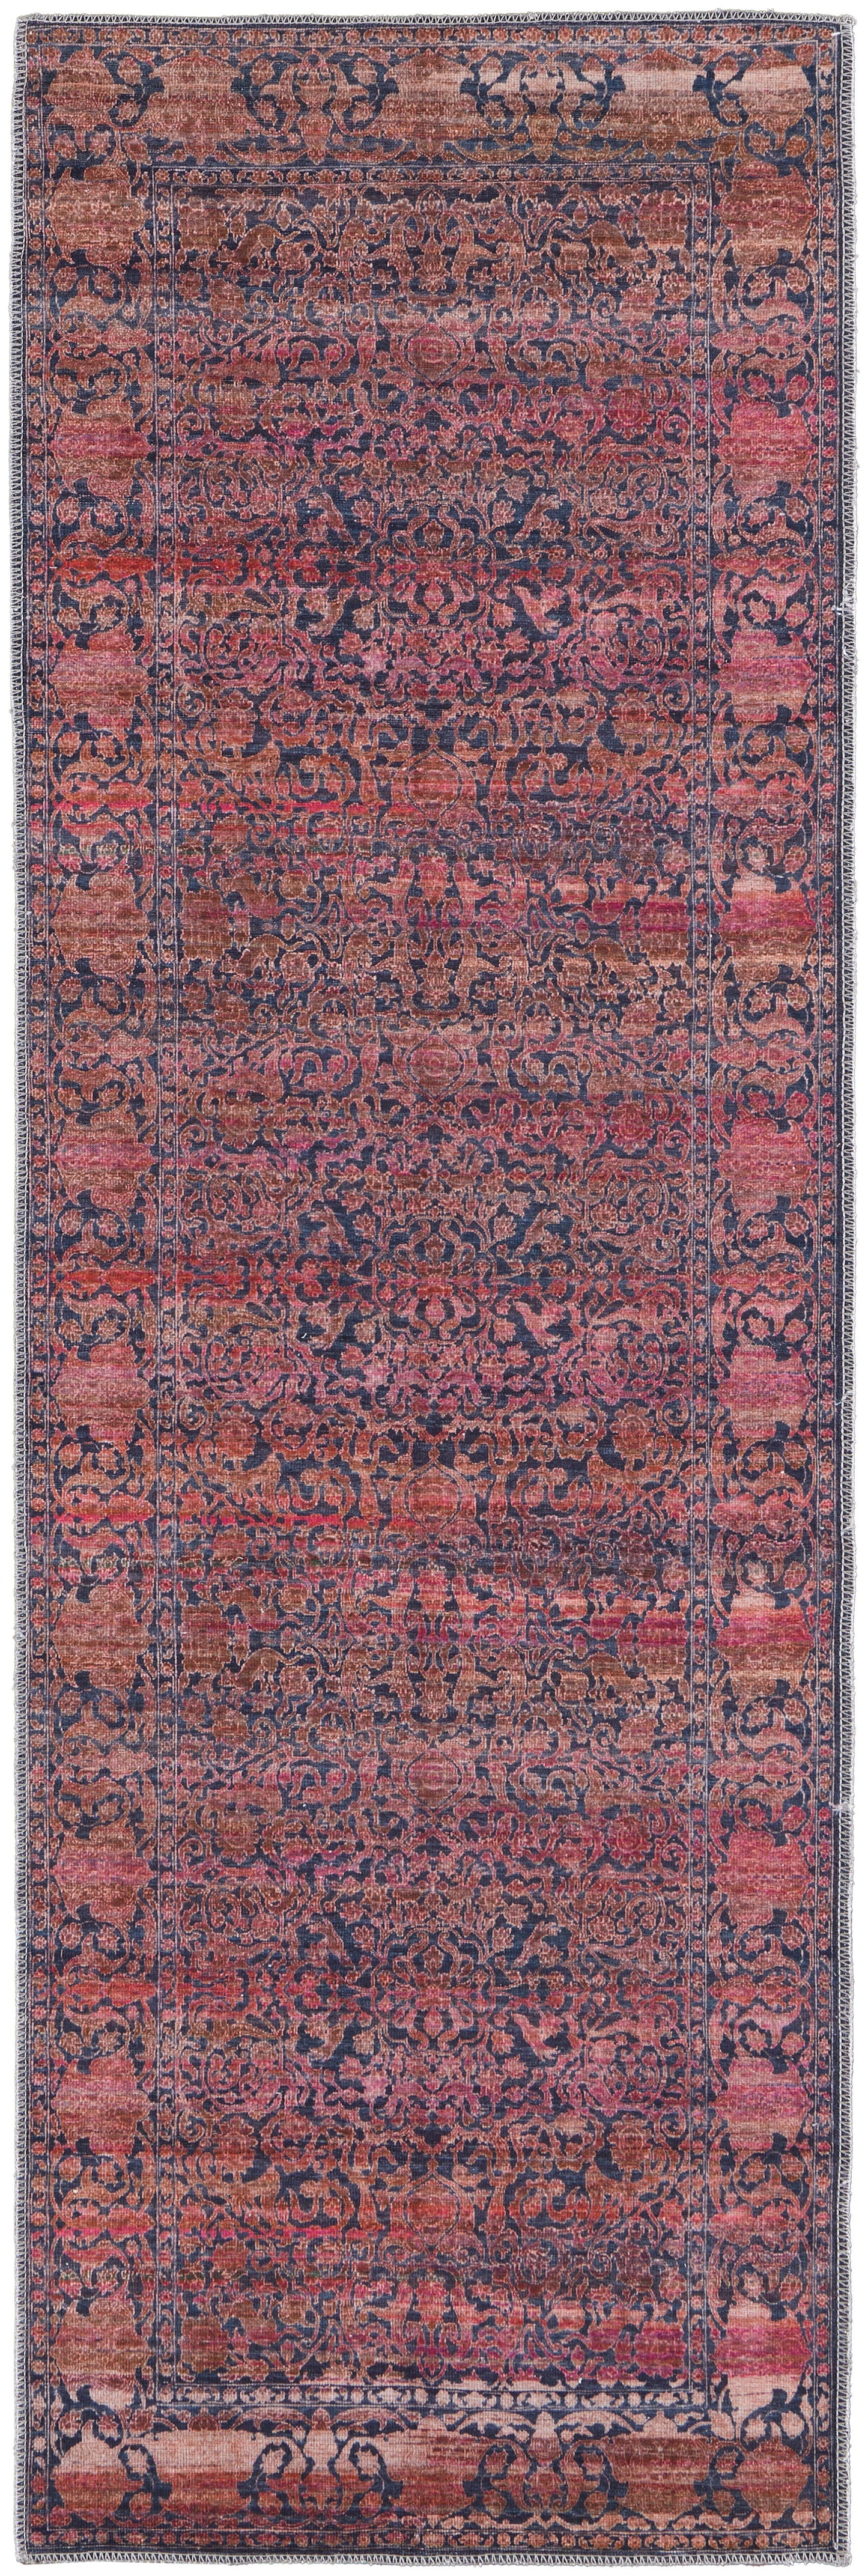 Voss 39HCF Power Loomed Synthetic Blend Indoor Area Rug by Feizy Rugs